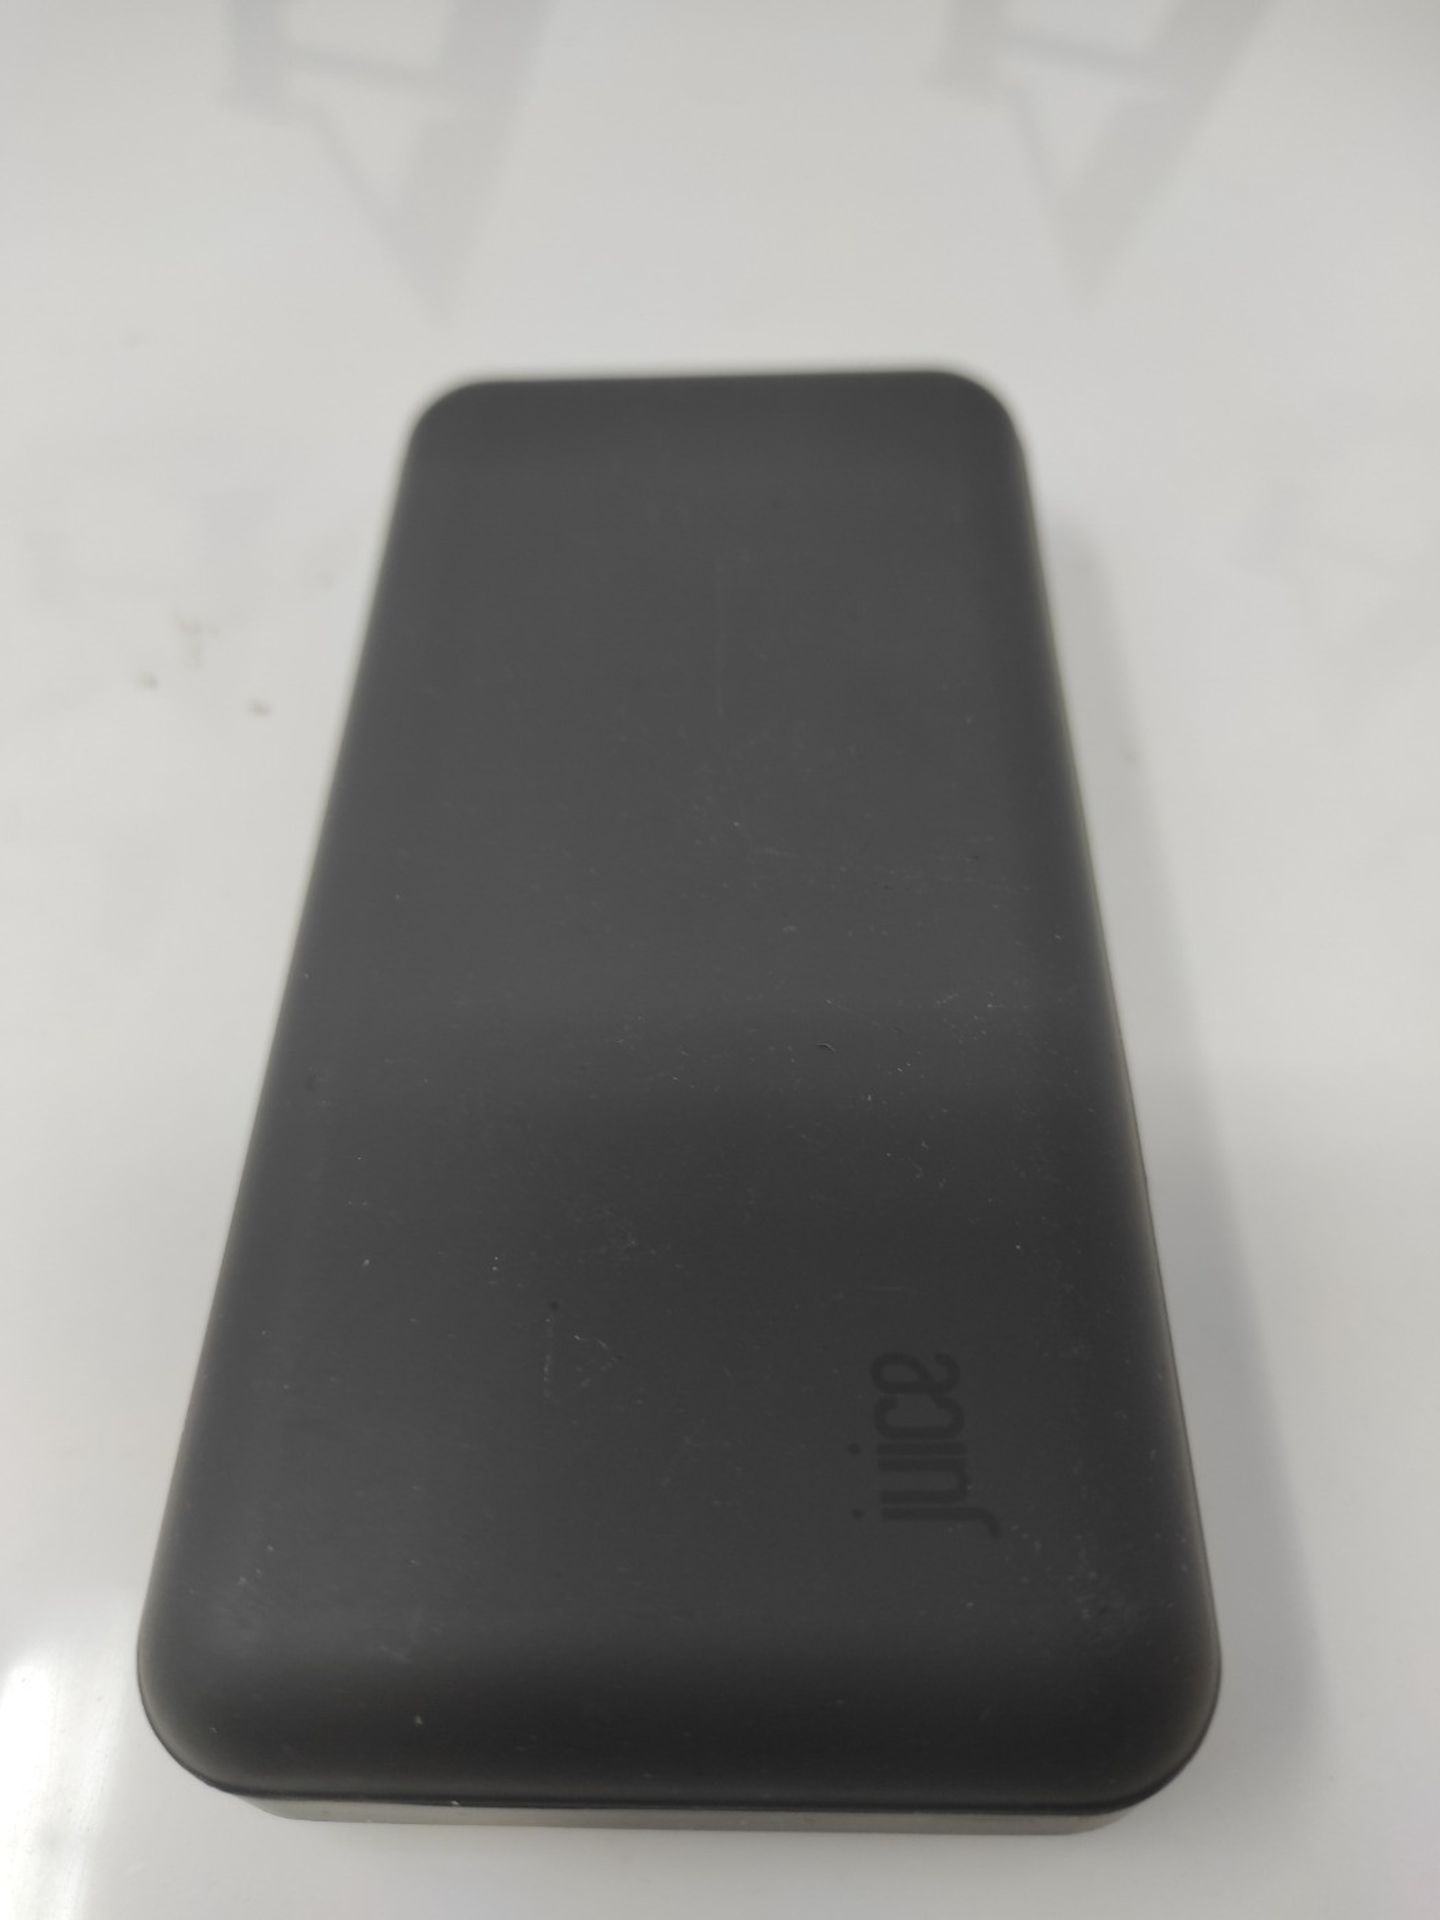 Juice MAX 7 Charges Power Bank | 20,000mAh 20W PD Portable Charger | Universal Compati - Image 2 of 2